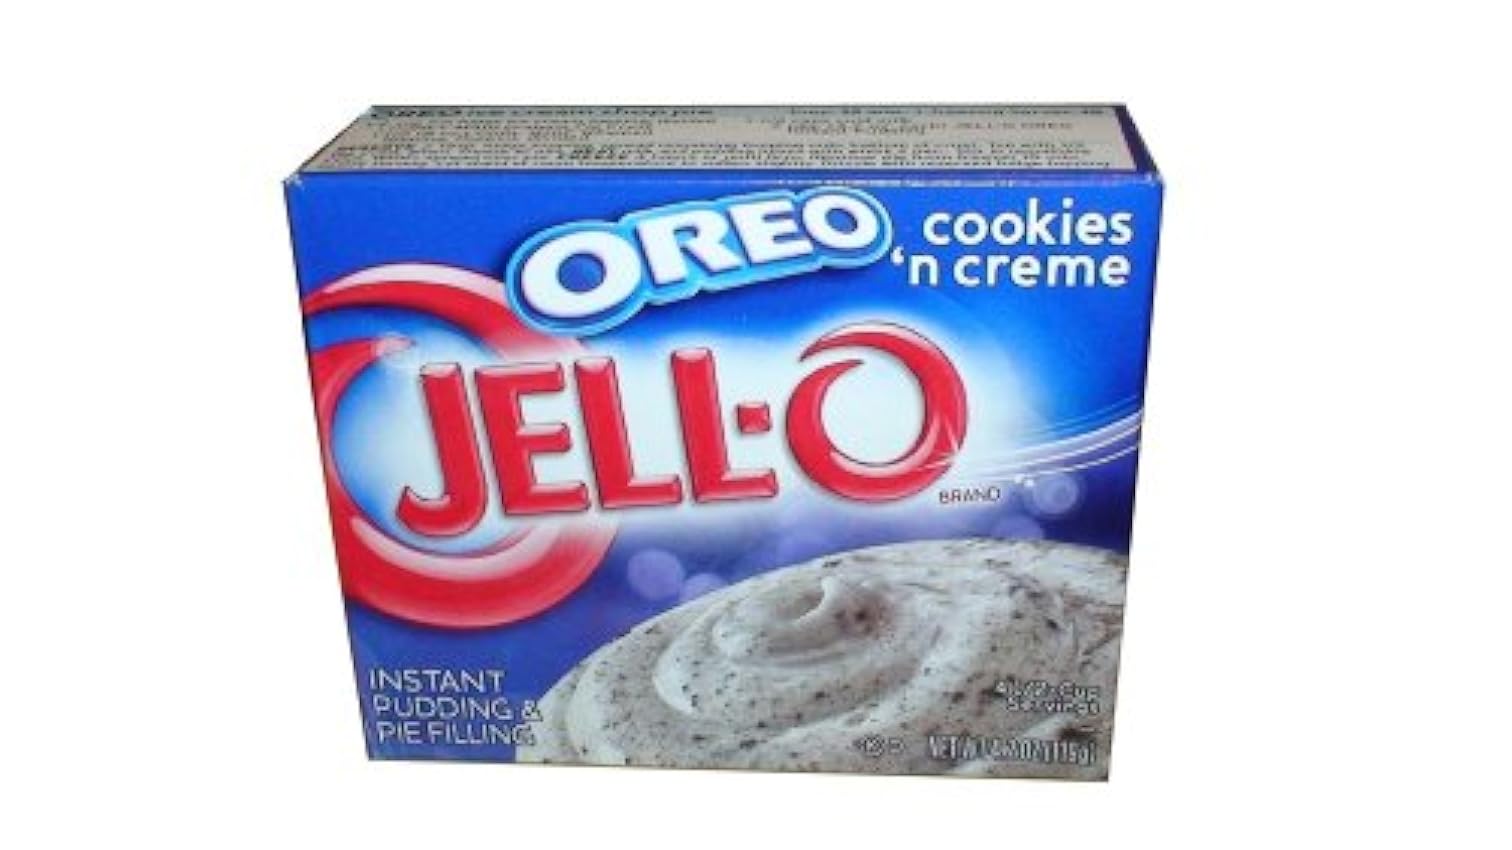 Jell-O Oreo Cookies and Cream Instant Pudding and Pie Filling 119g i0GPfNod